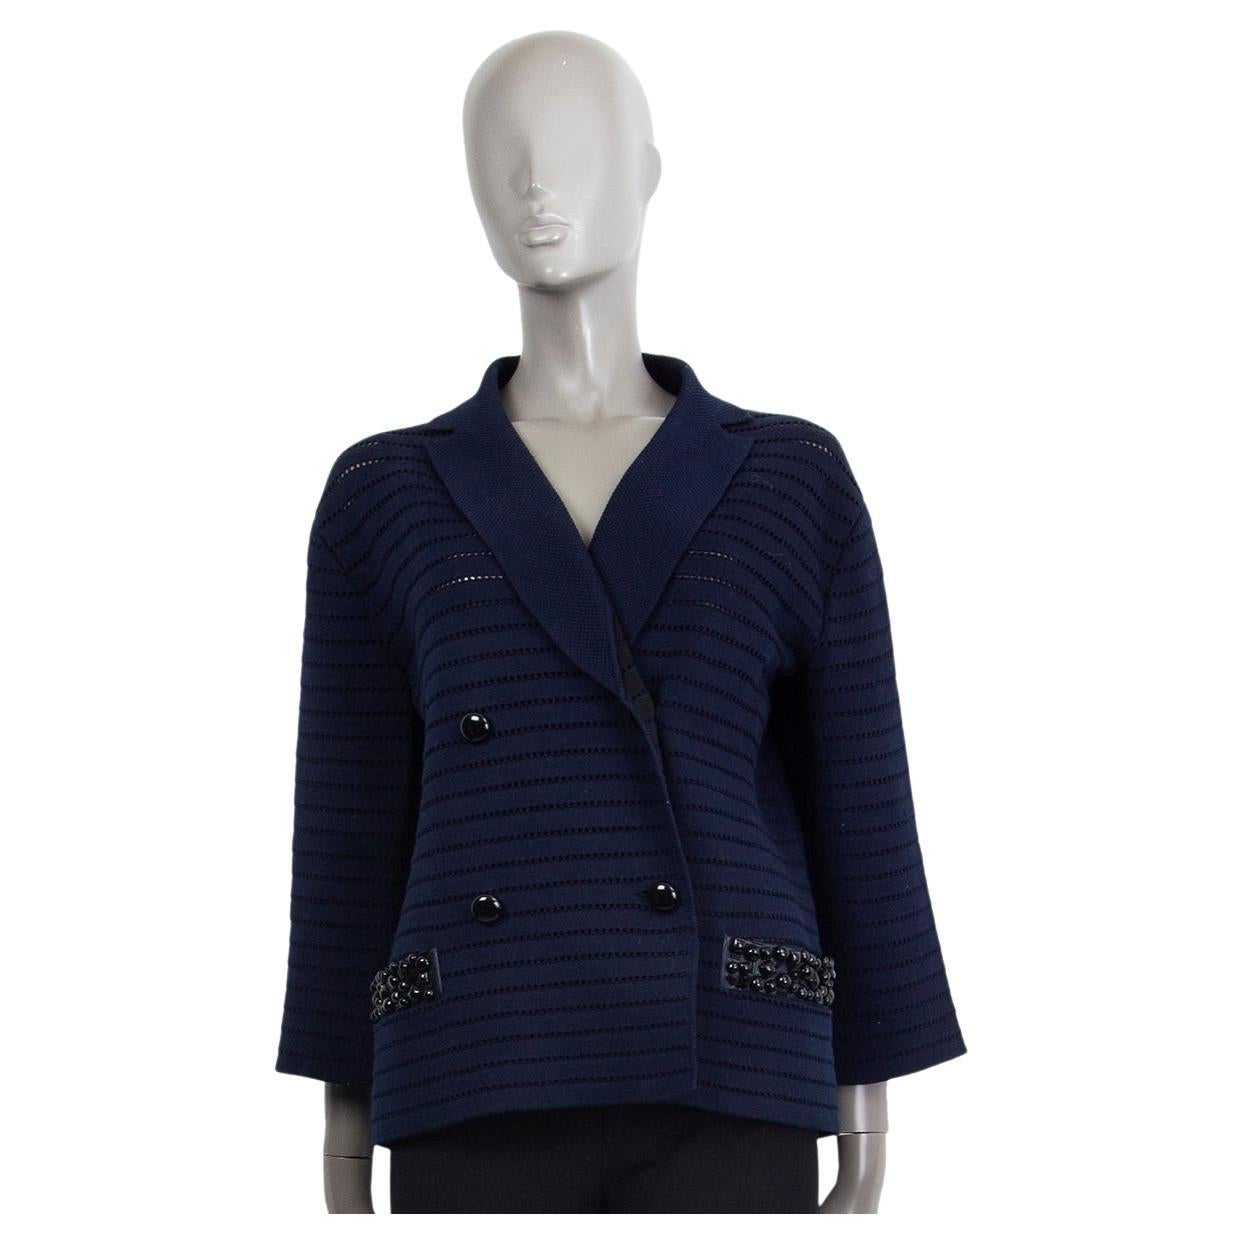 LOUIS VUITTON navy blue cotton BEADED DOUBLE BREASTED KNIT Jacket M